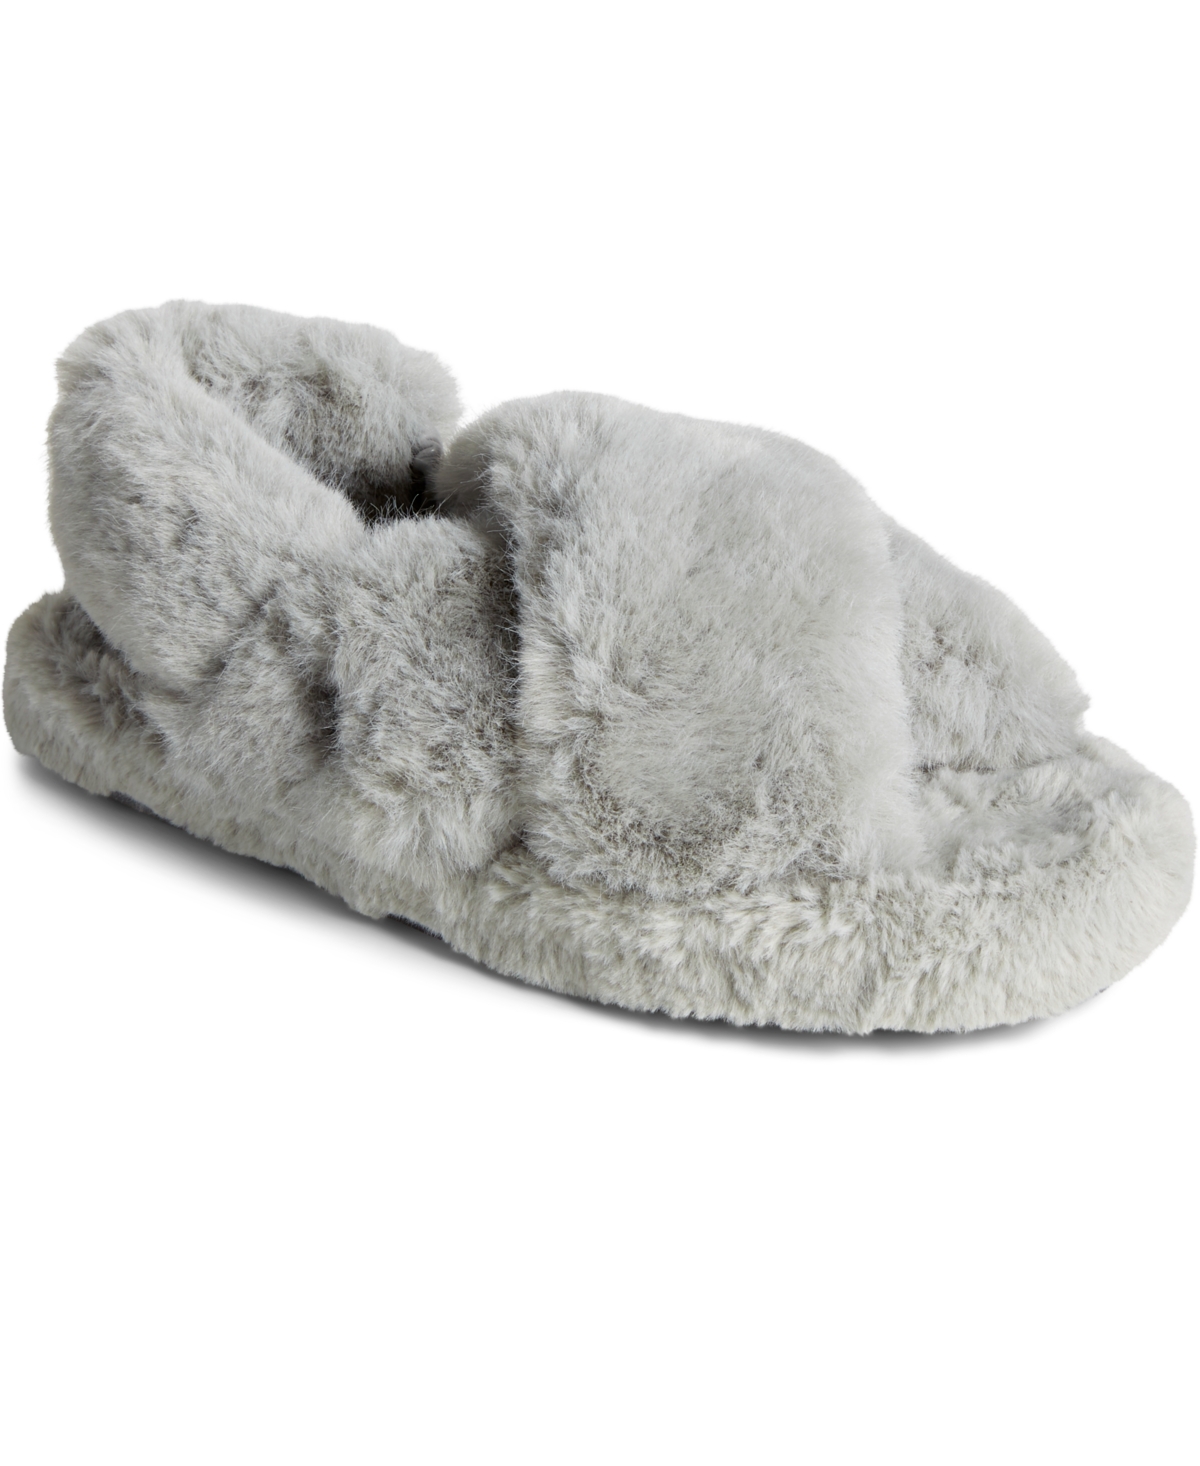 Women's Cape May X-Strap Slippers - Gray